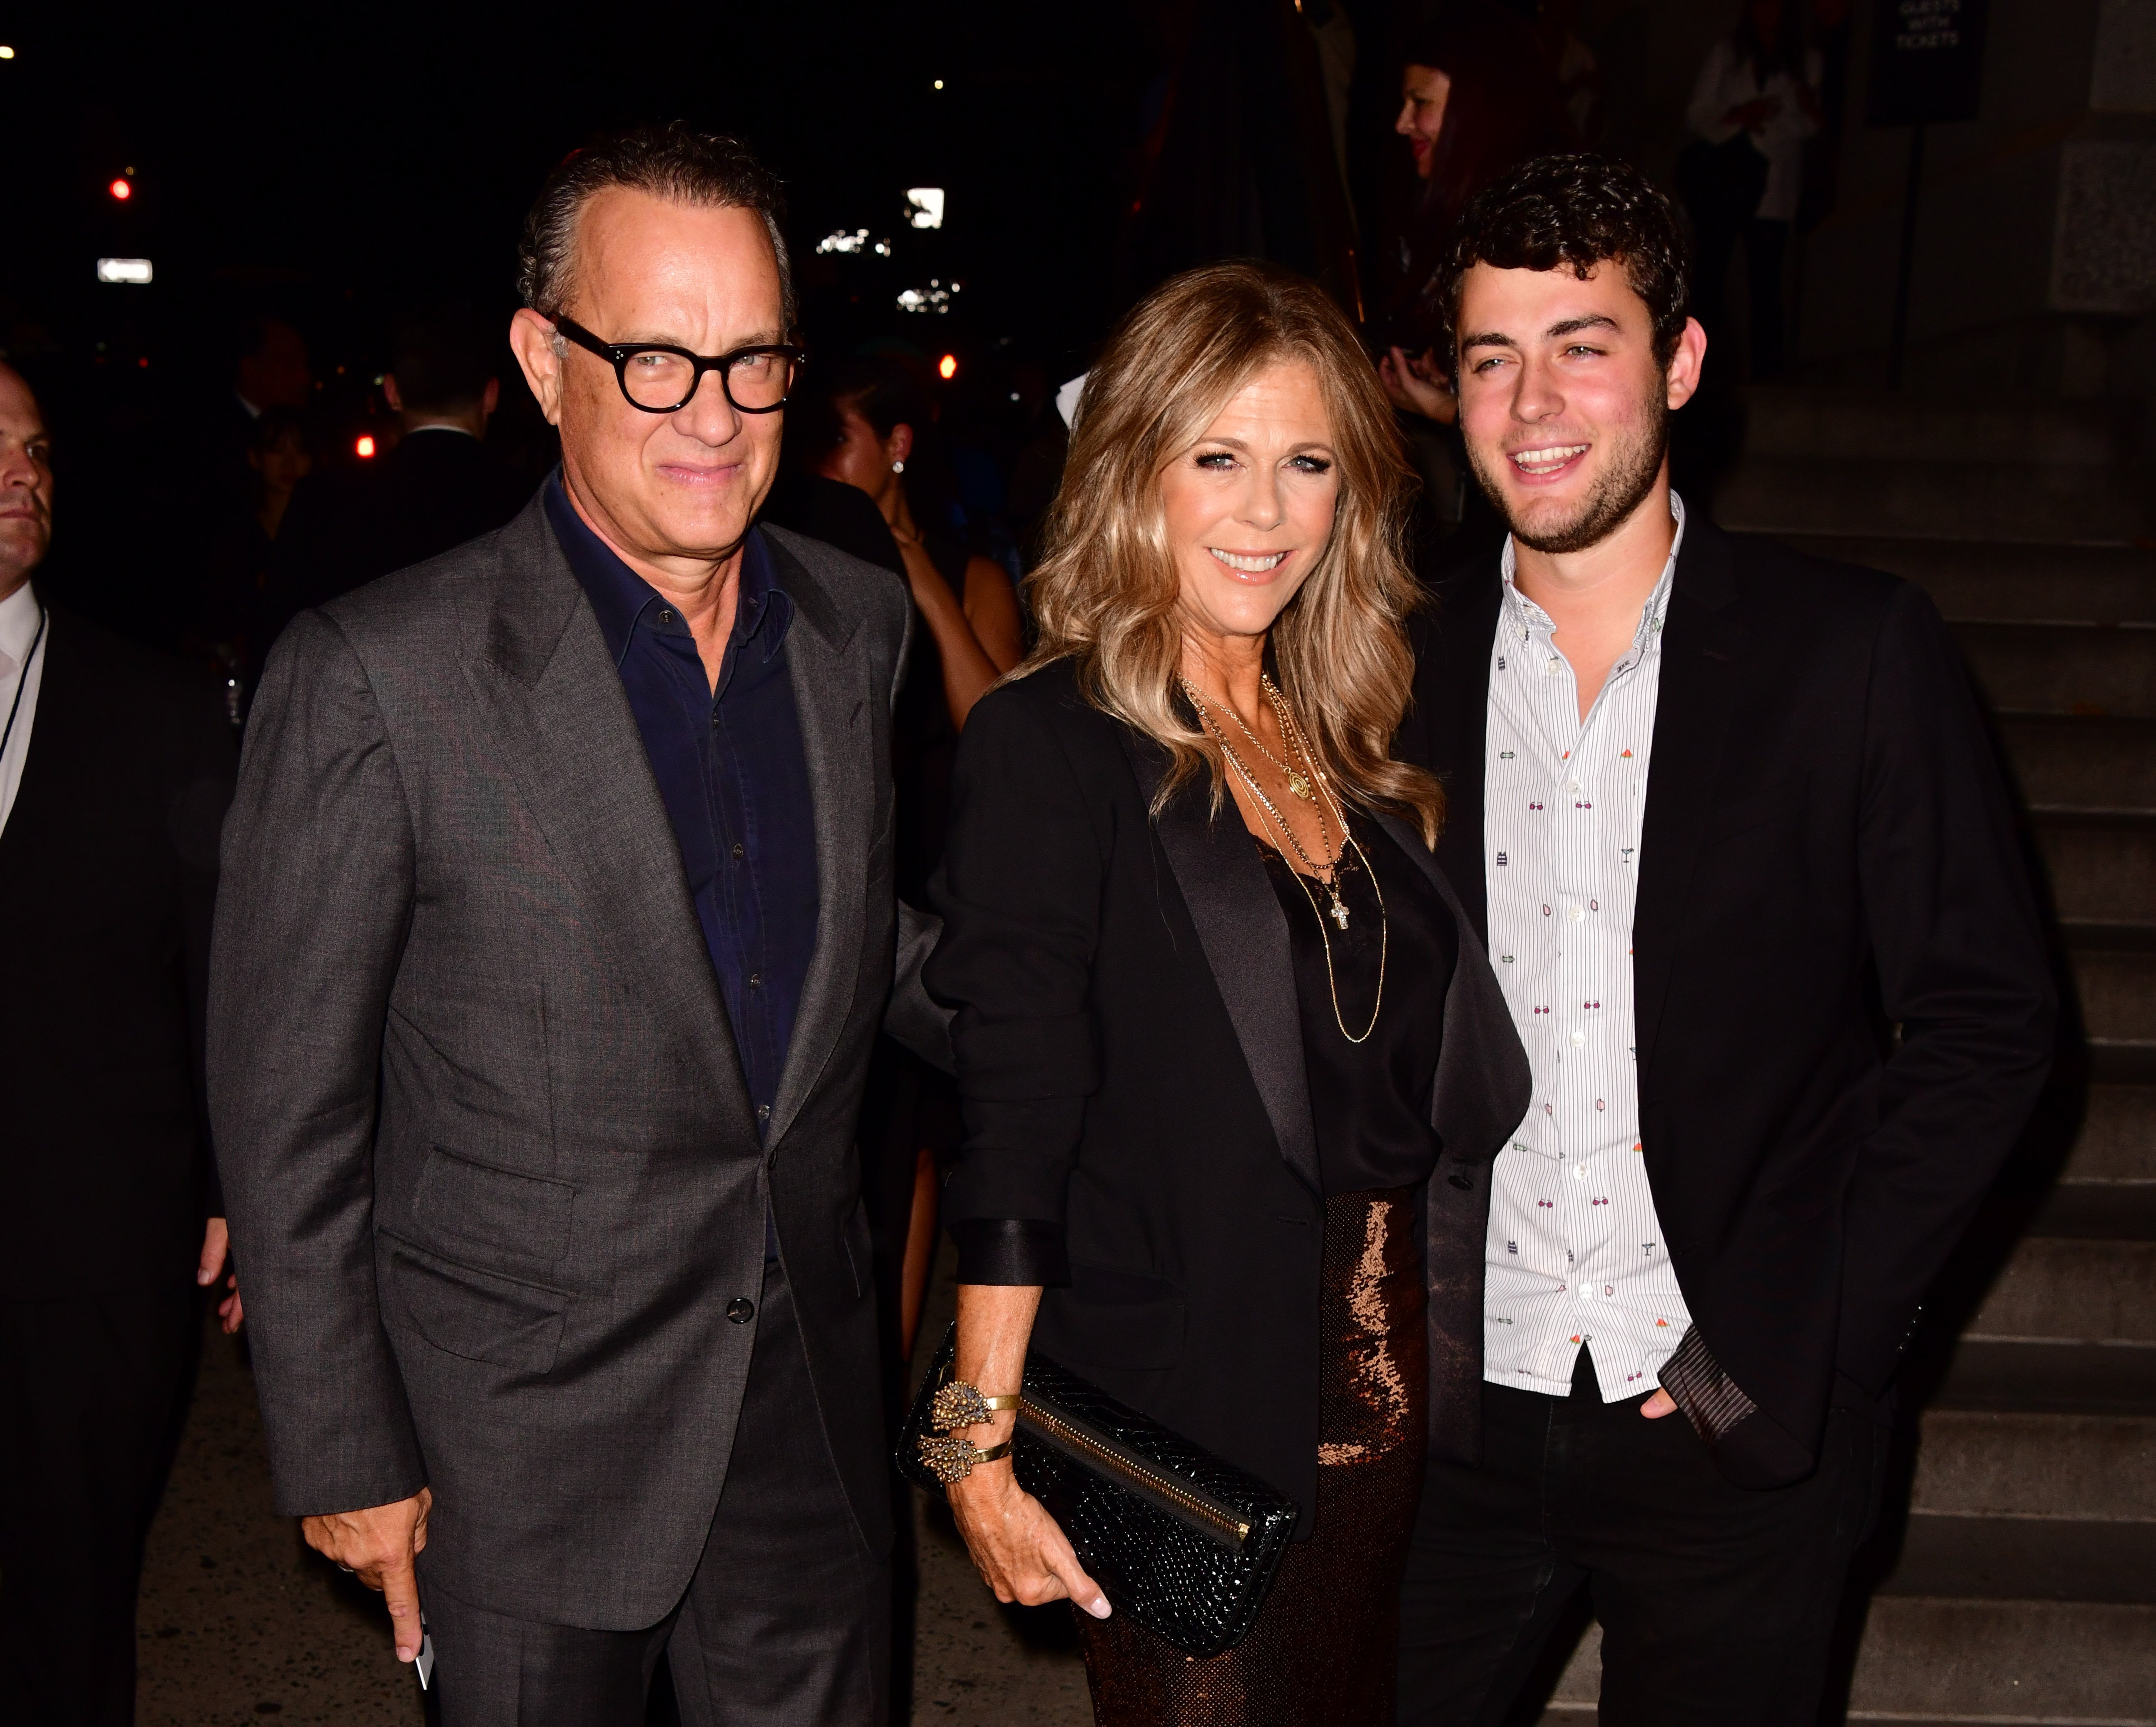 Tom Hanks, Tom Hanks, Rita Wilson, and Truman Hanks are photographed as they arrive at the Tom Ford fashion show in New York City | Source: Getty Images